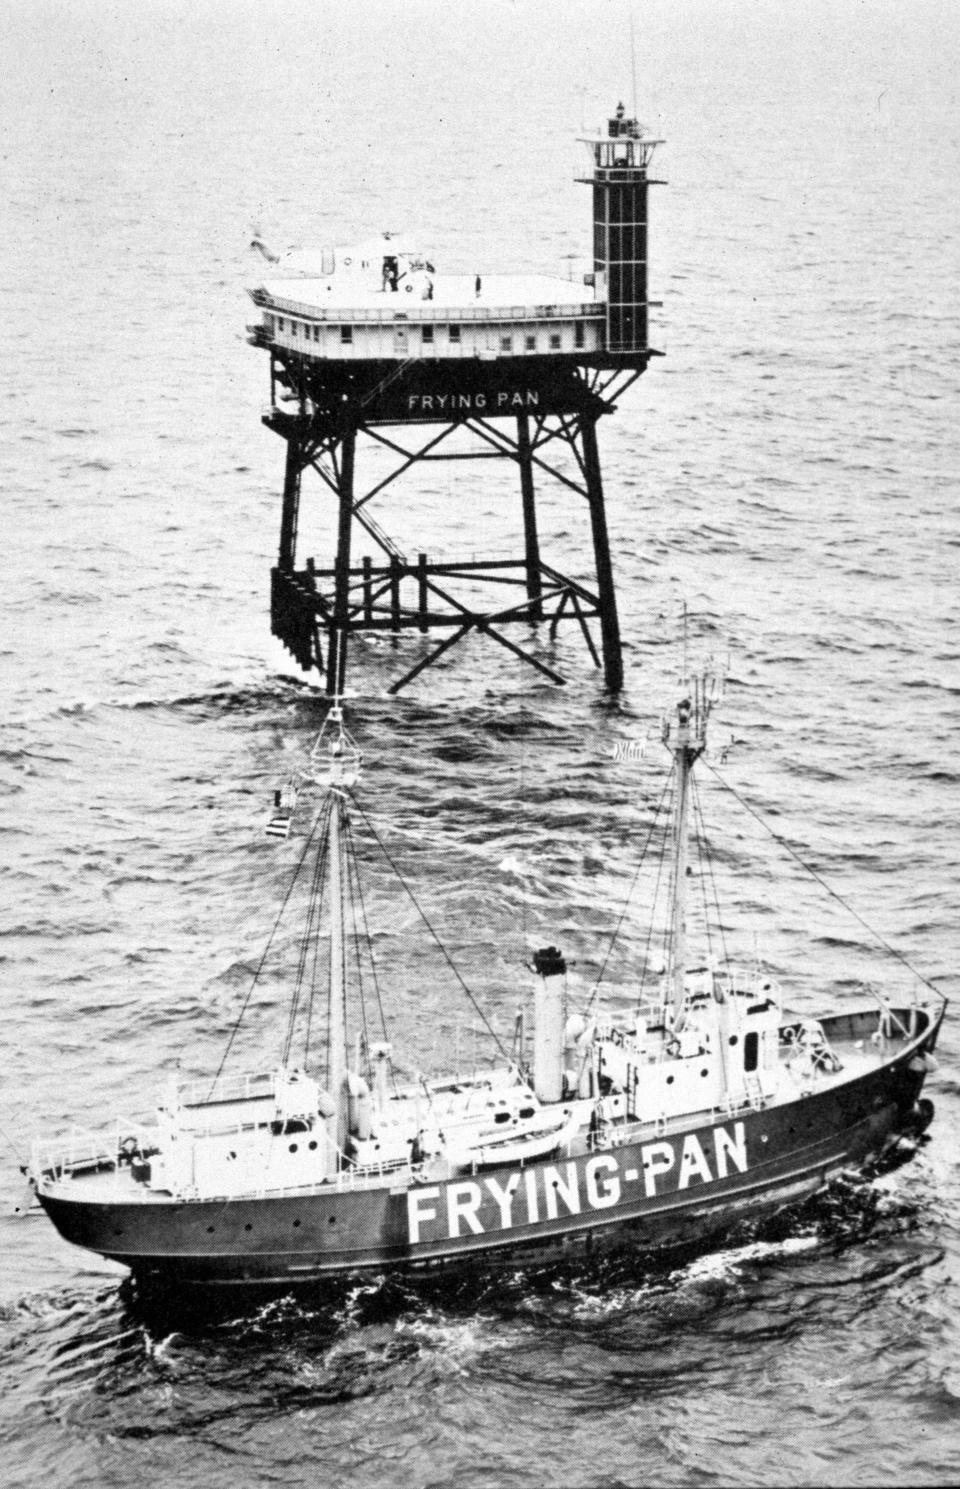 The Frying Pan Lightship blows a final whistle as it hands off its duty as the light of Frying Pan Shoals to Frying Pan Tower on Nov. 24, 1964. [PHOTO COURTESY OF DR. ROBERT M. FALES COLLECTION/NEW HANOVER COUNTY PUBLIC LIBRARY]